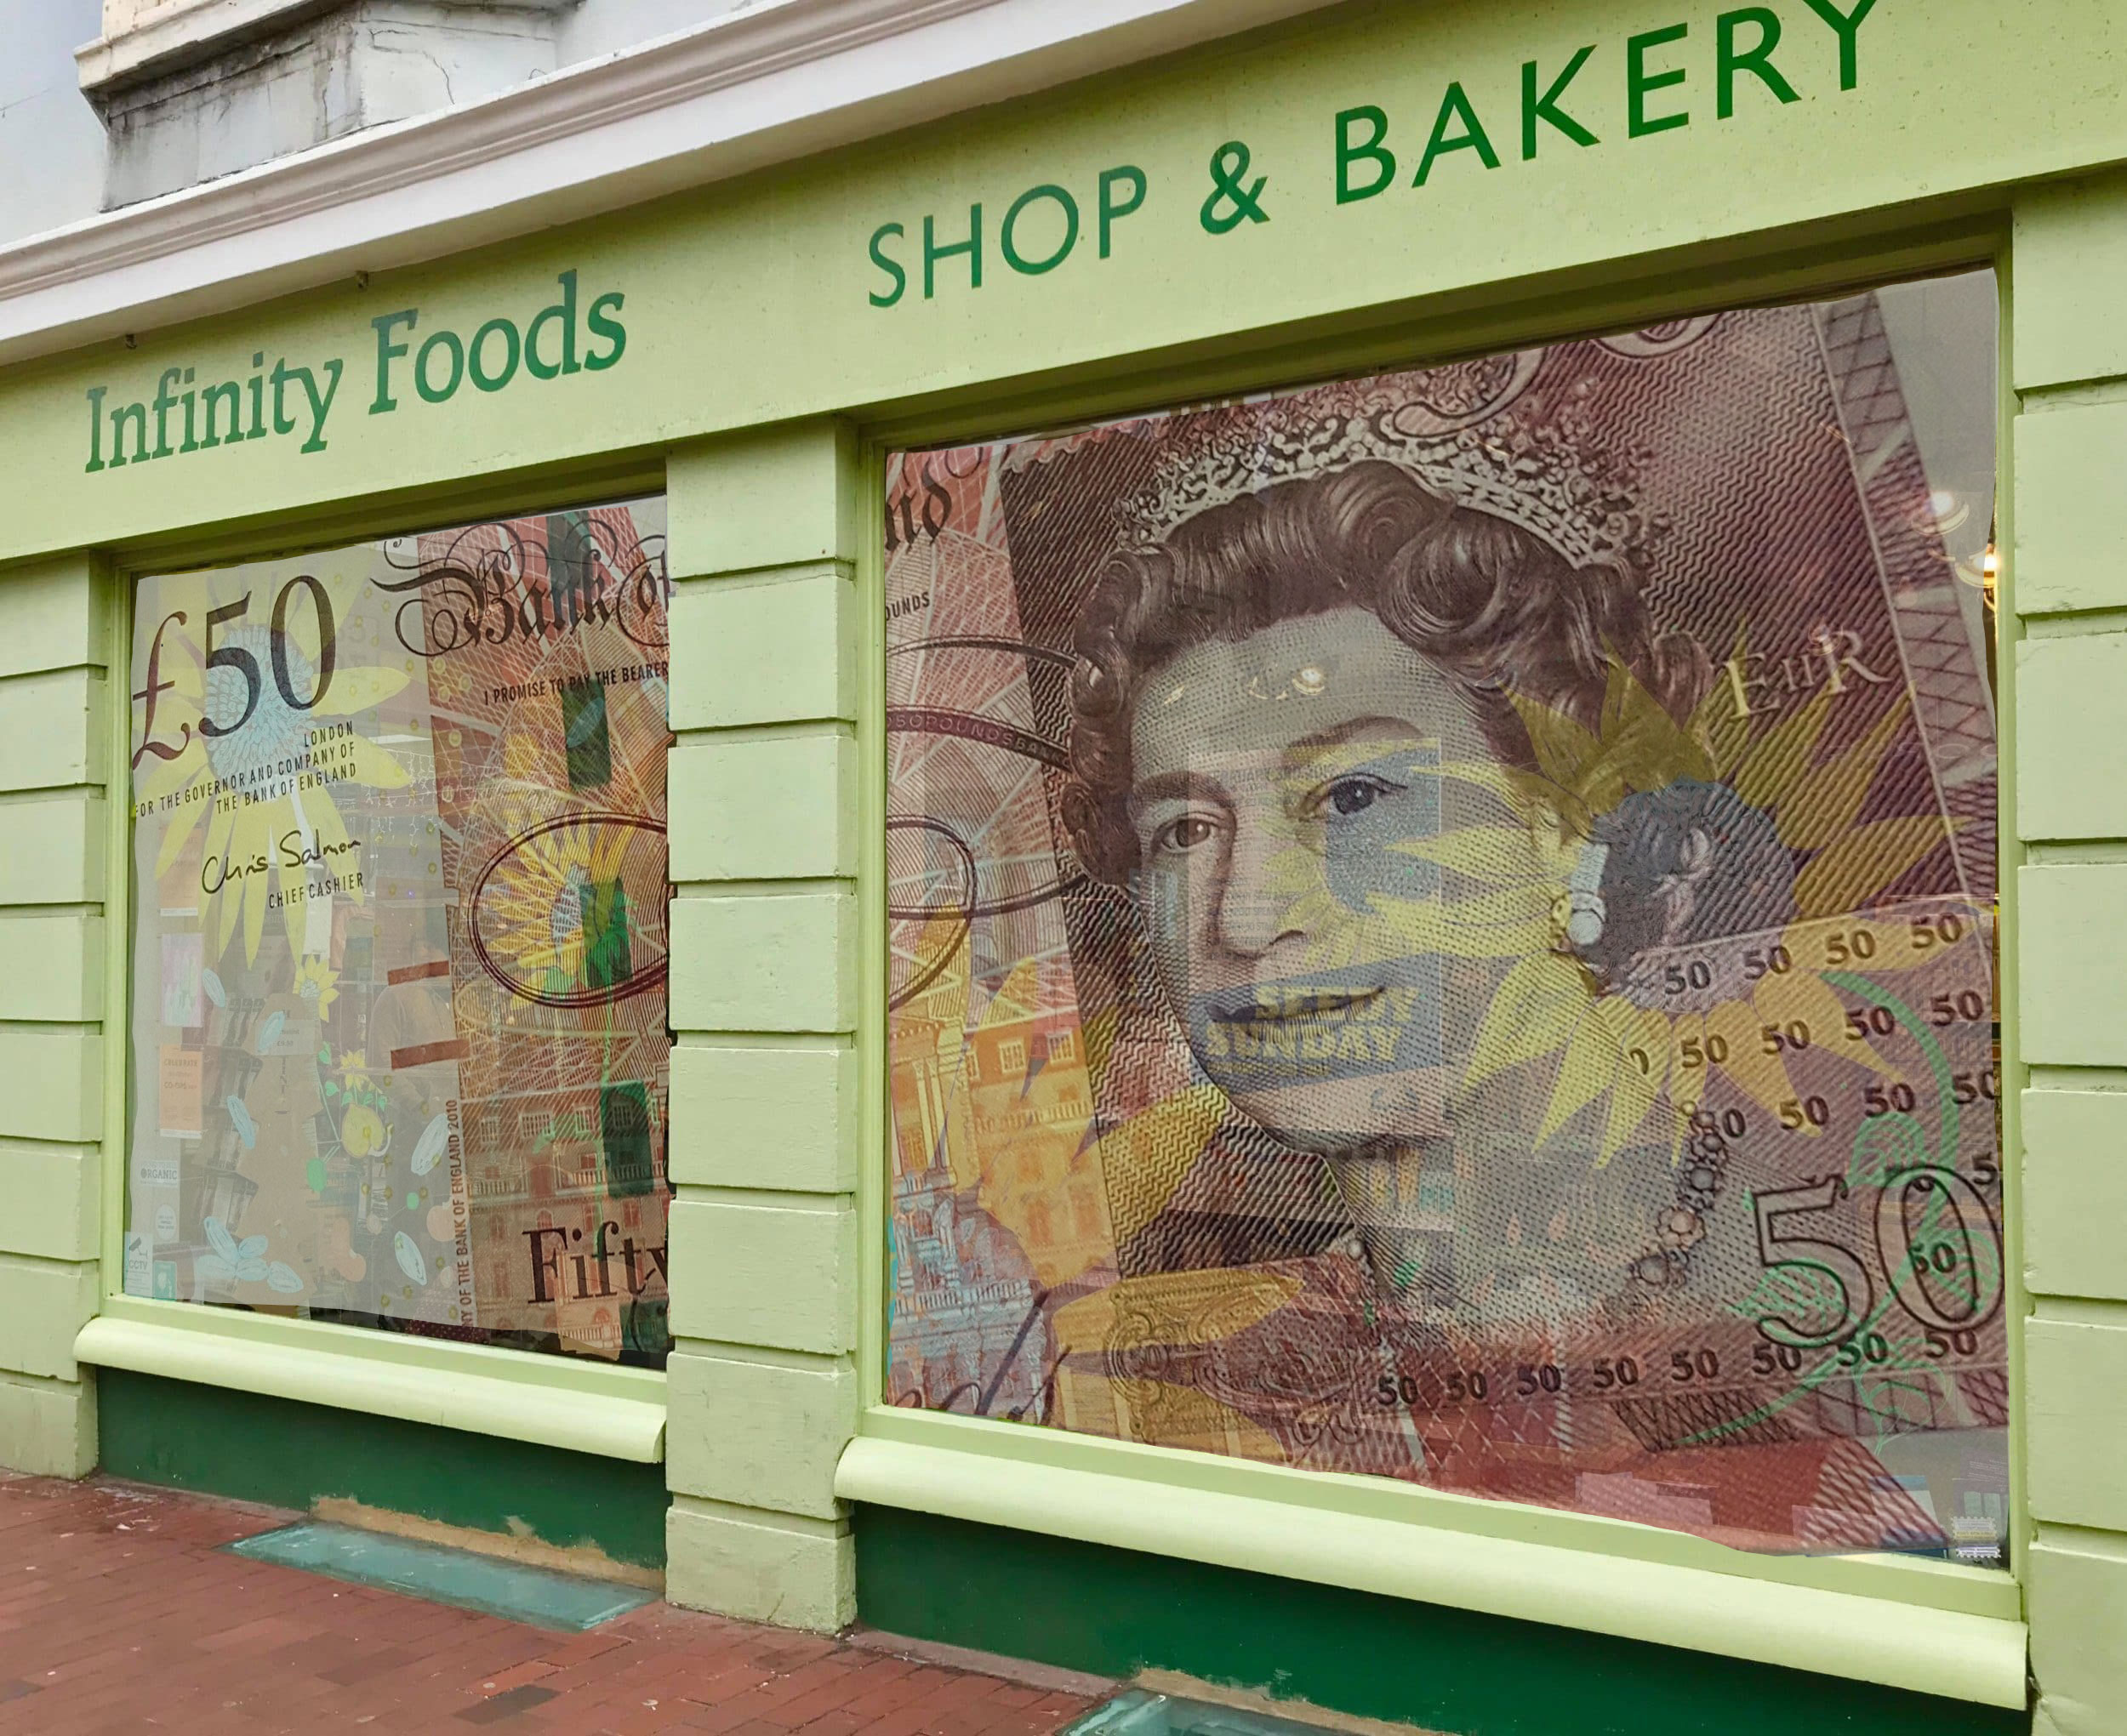 image of shop with £50 note super imposed in window